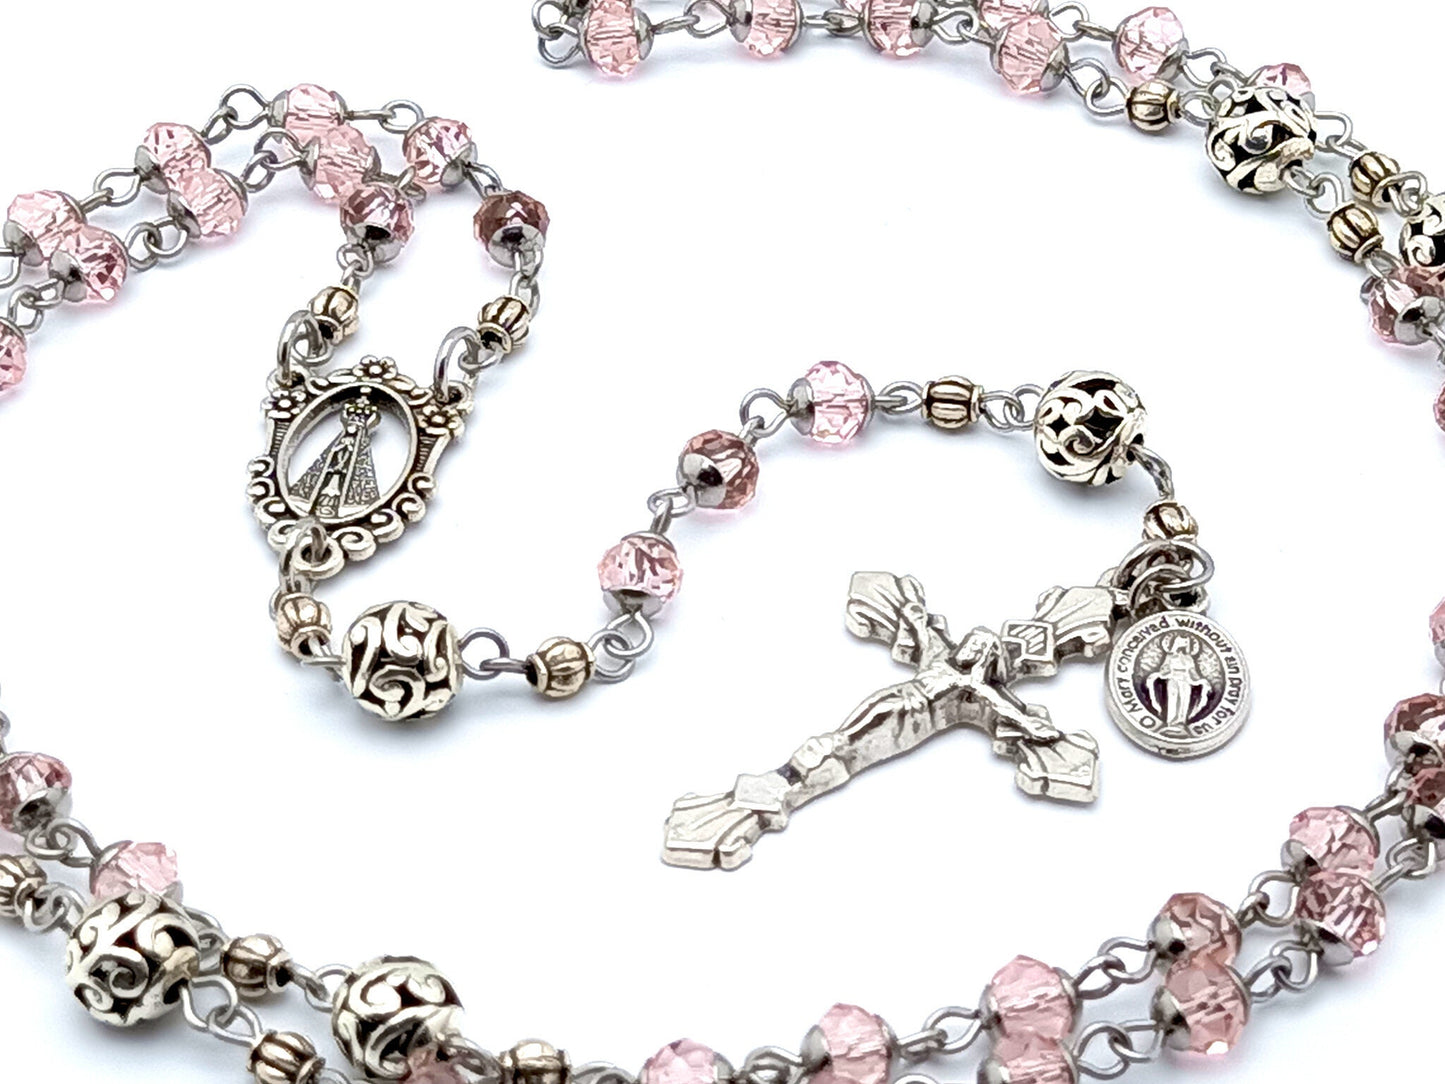 Our Lady of Charity unique rosary beads pink glass and Tibetan silver rosary beads with silver crucifix and a Miraculous medal.